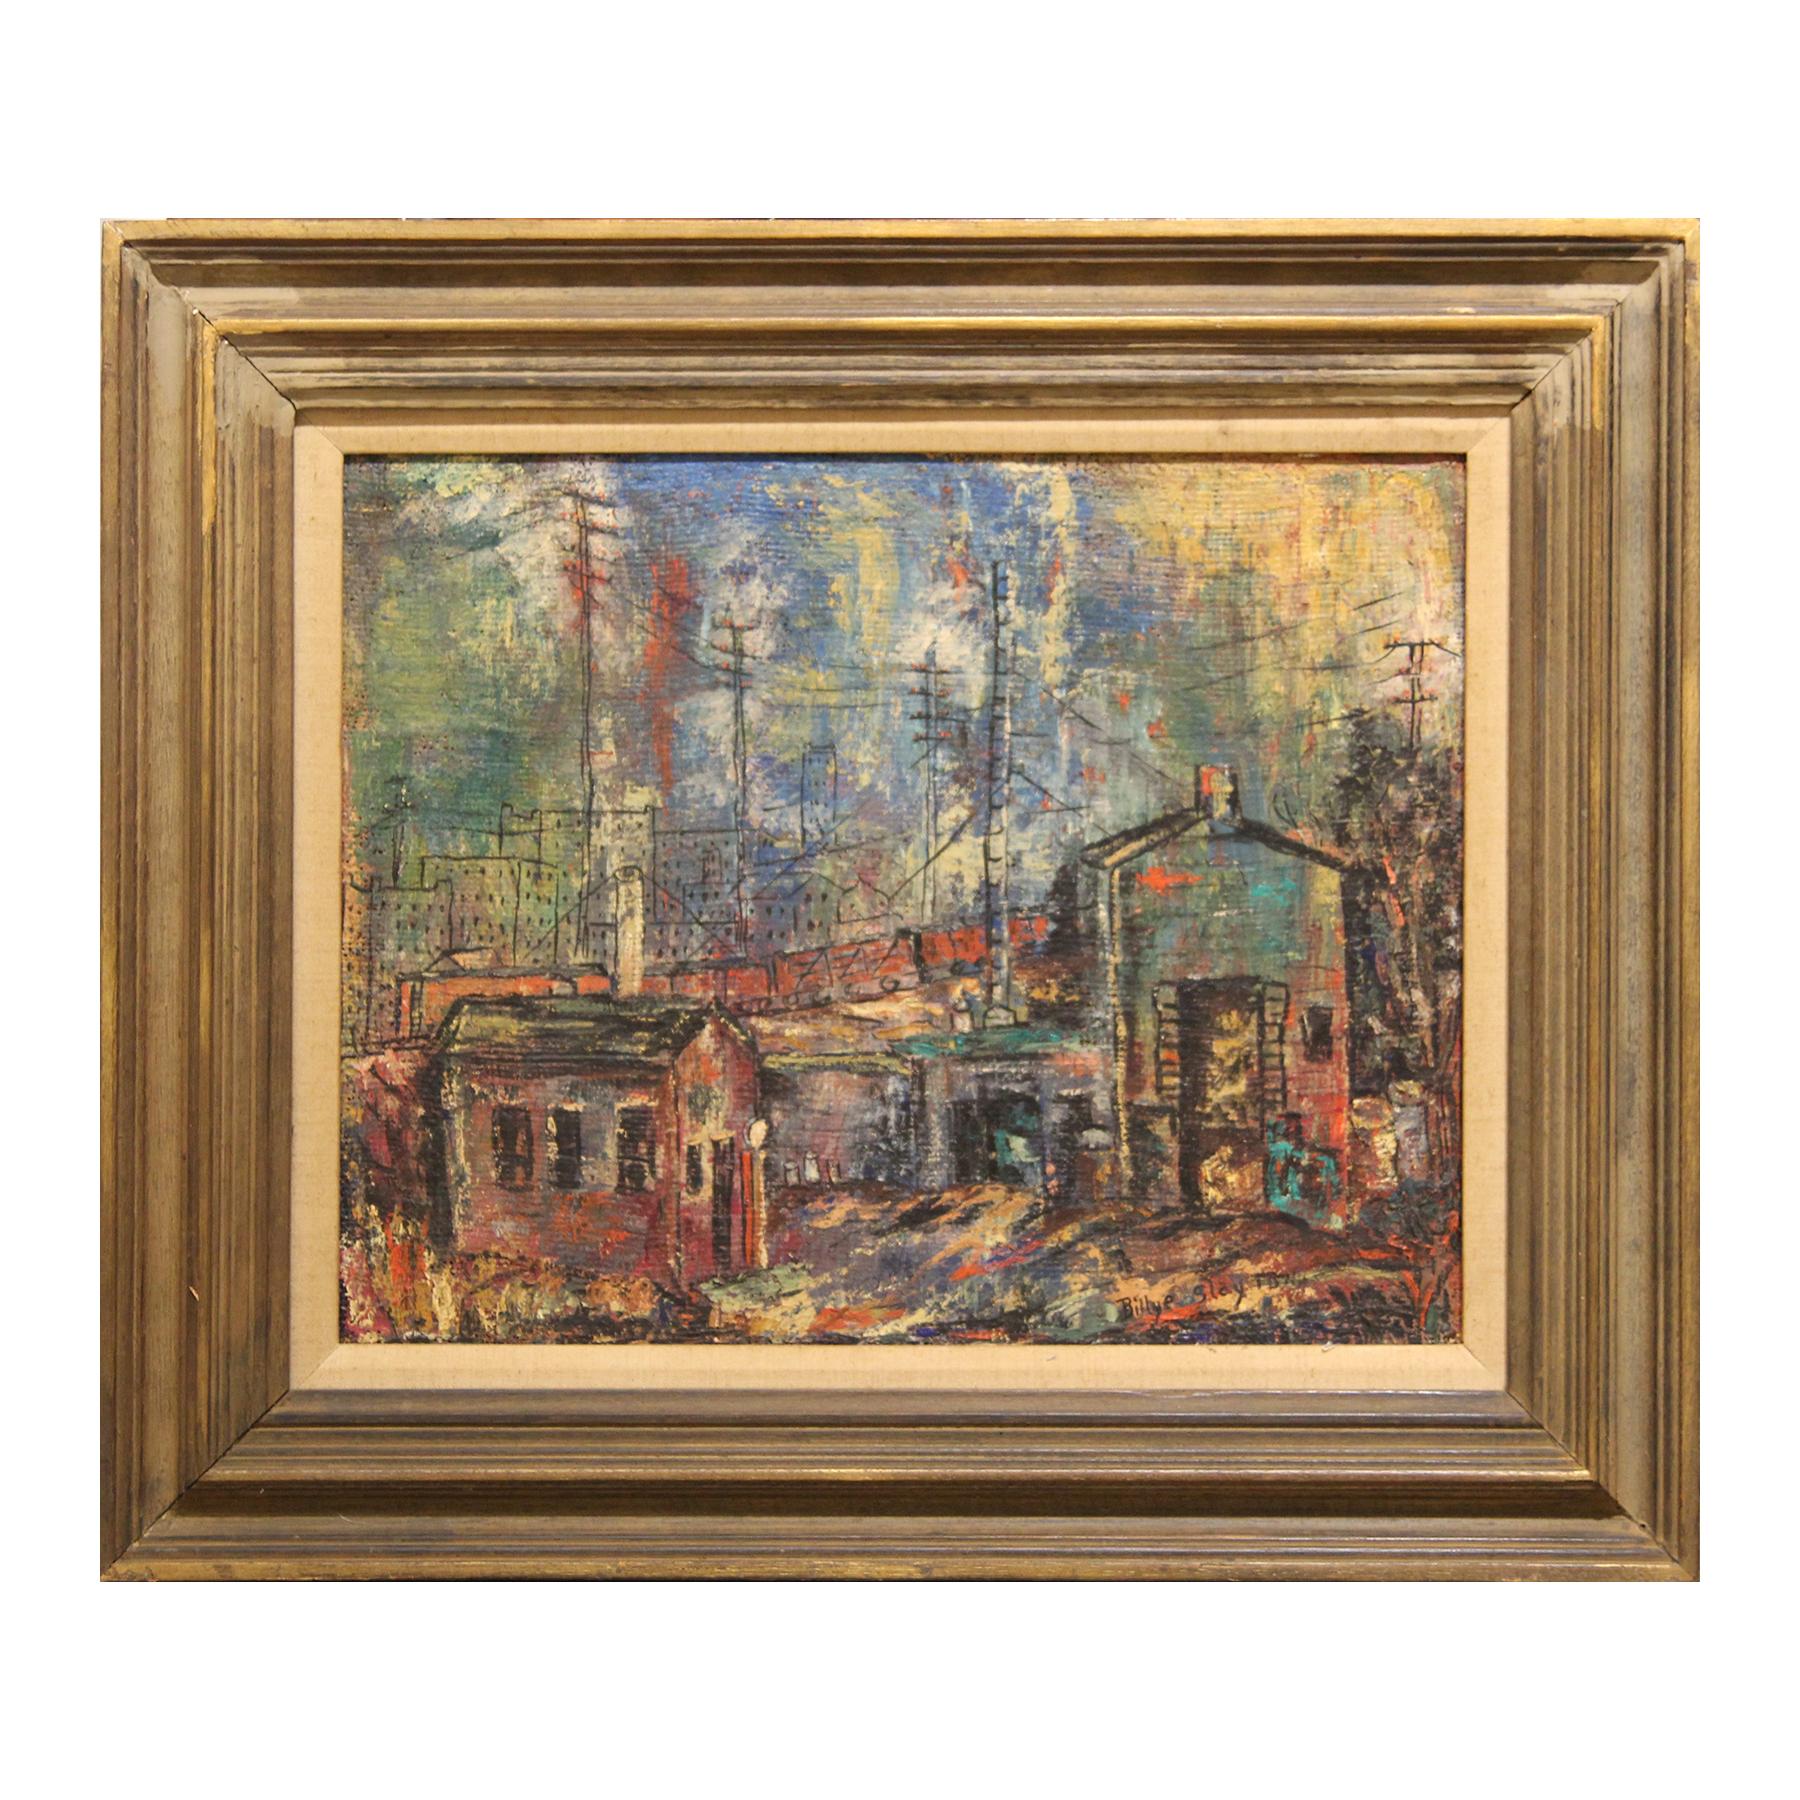 Billye Slayton Landscape Painting - "Slaughter House" Colorful Abstract Cityscape Painting